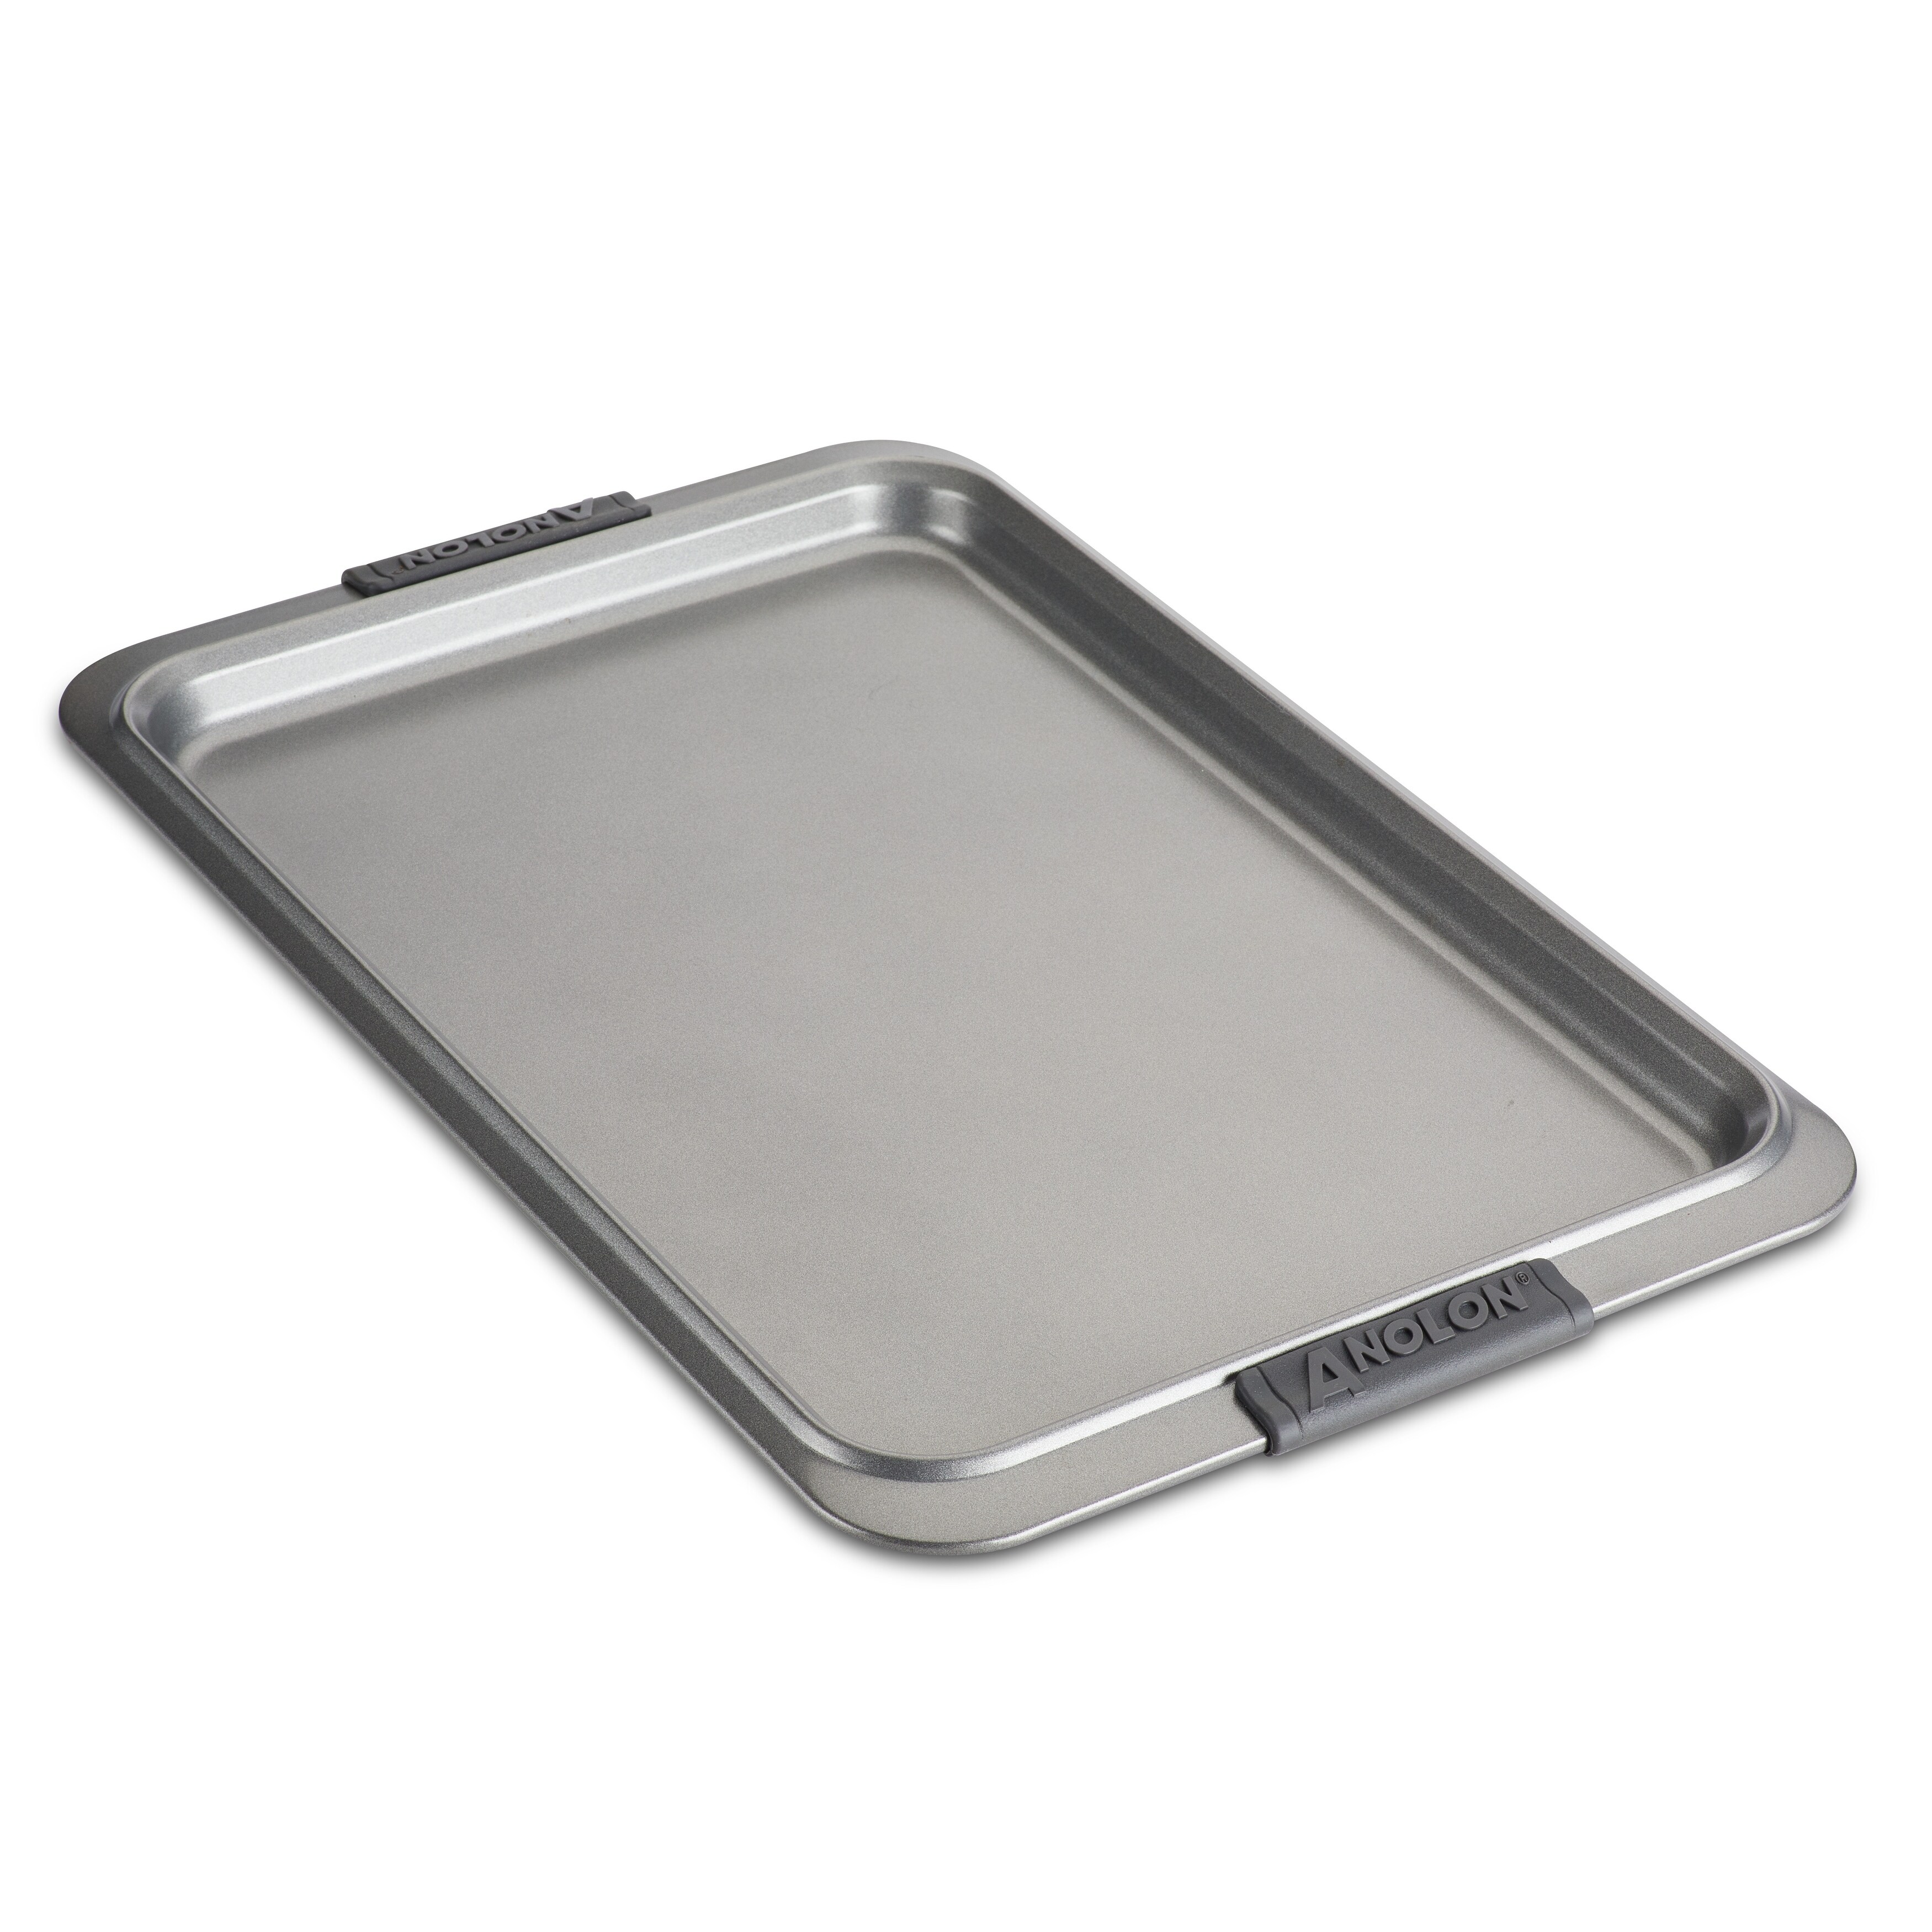 Cuisinart 17-Inch Non-Stick Aluminum Baking Sheet with Silicone